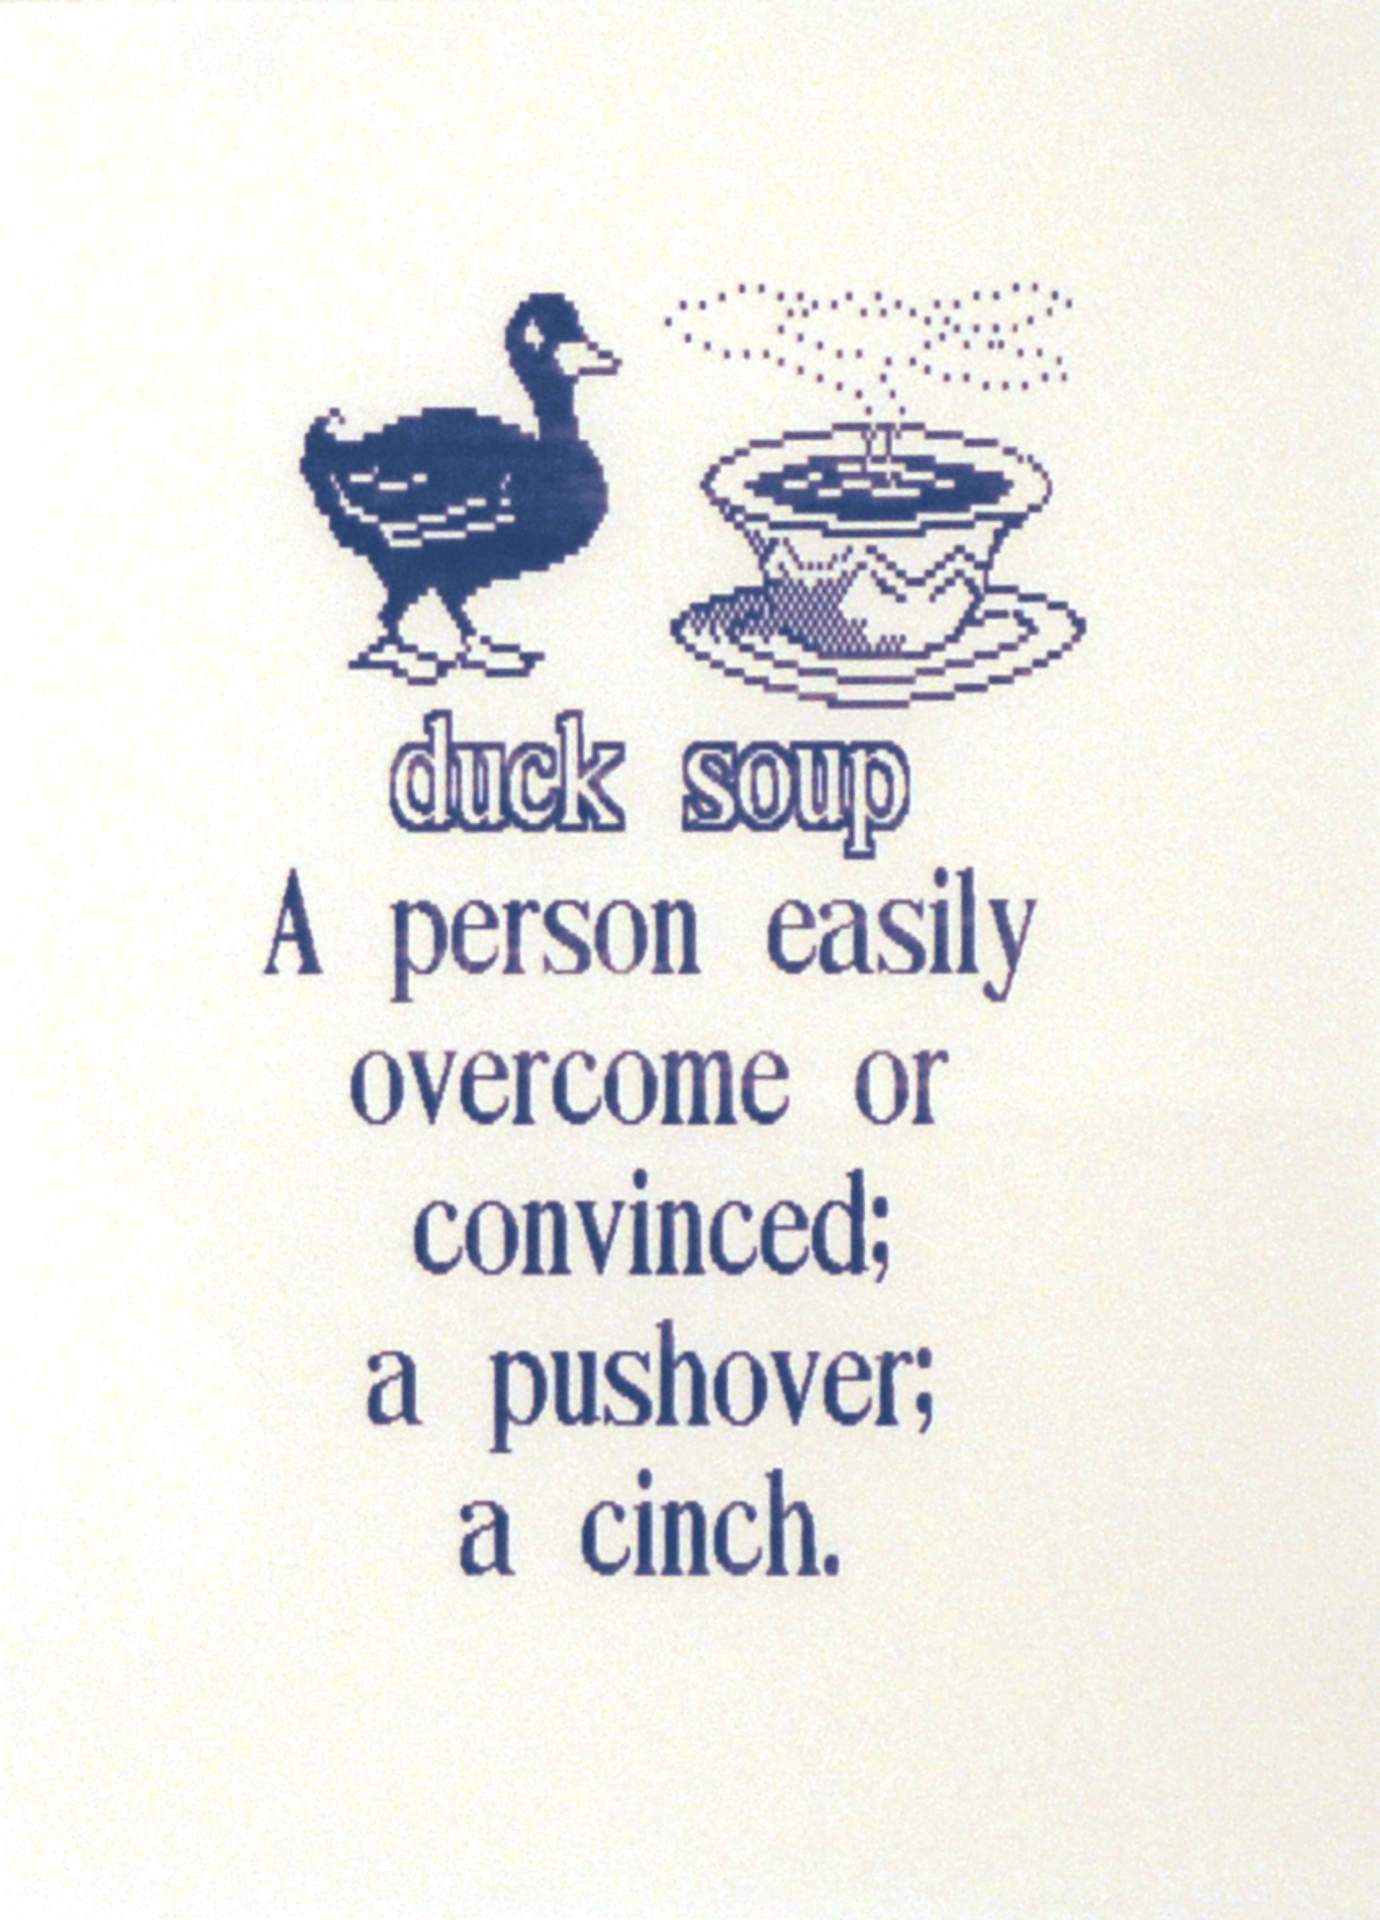 Duck Soup, from the series Neither Nor: A Primer